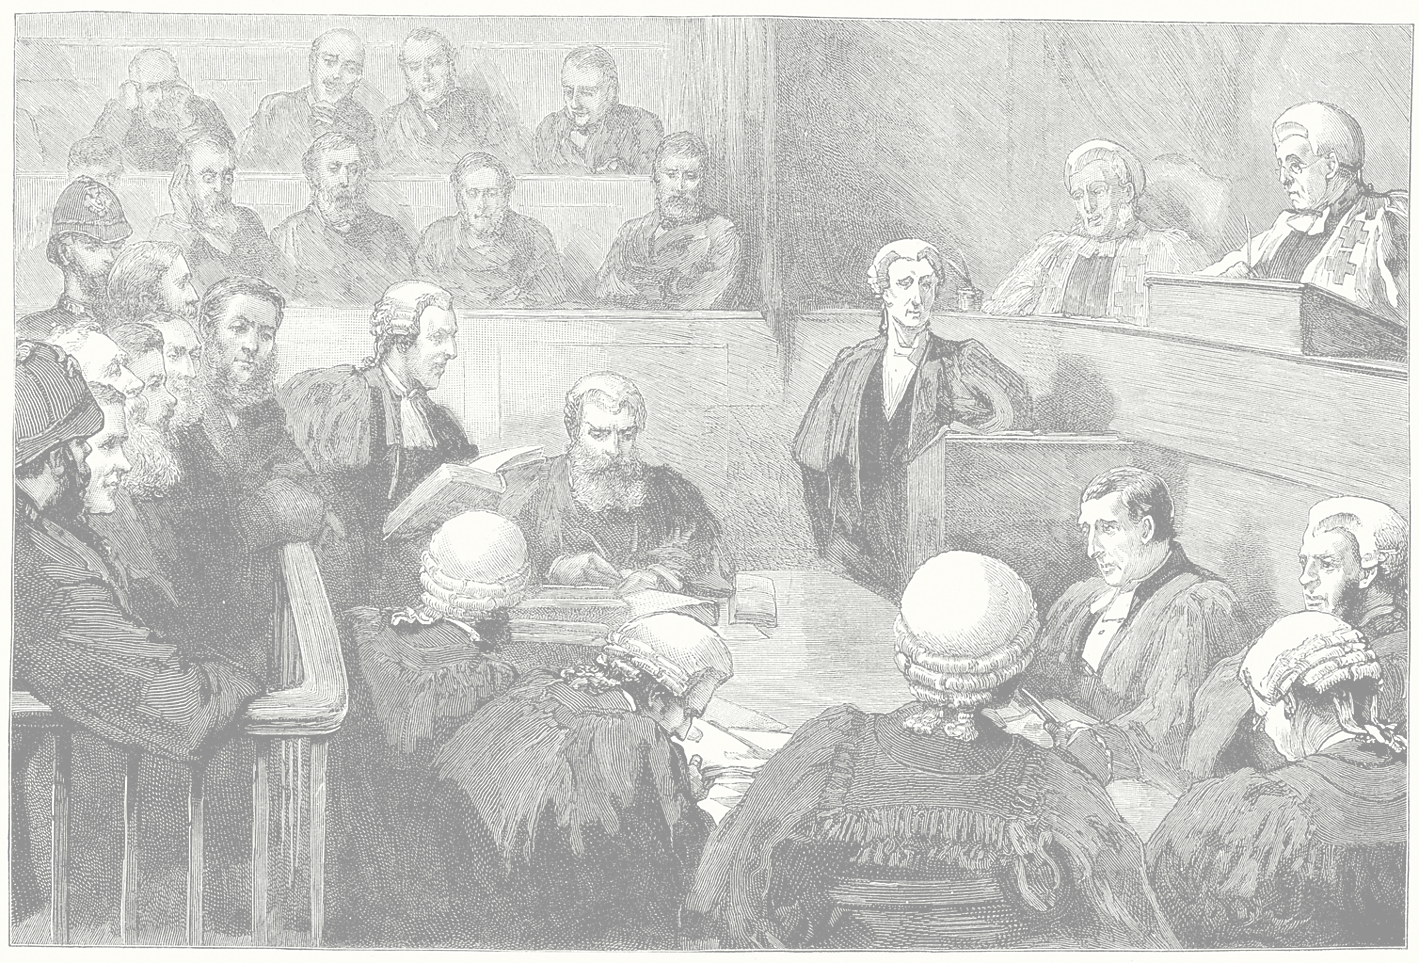 Cato Courses BG - Trial of the Lewis Deer Raiders at Edinburgh, Victorian courtroom justice, Judge, 19th Century - stock illustration